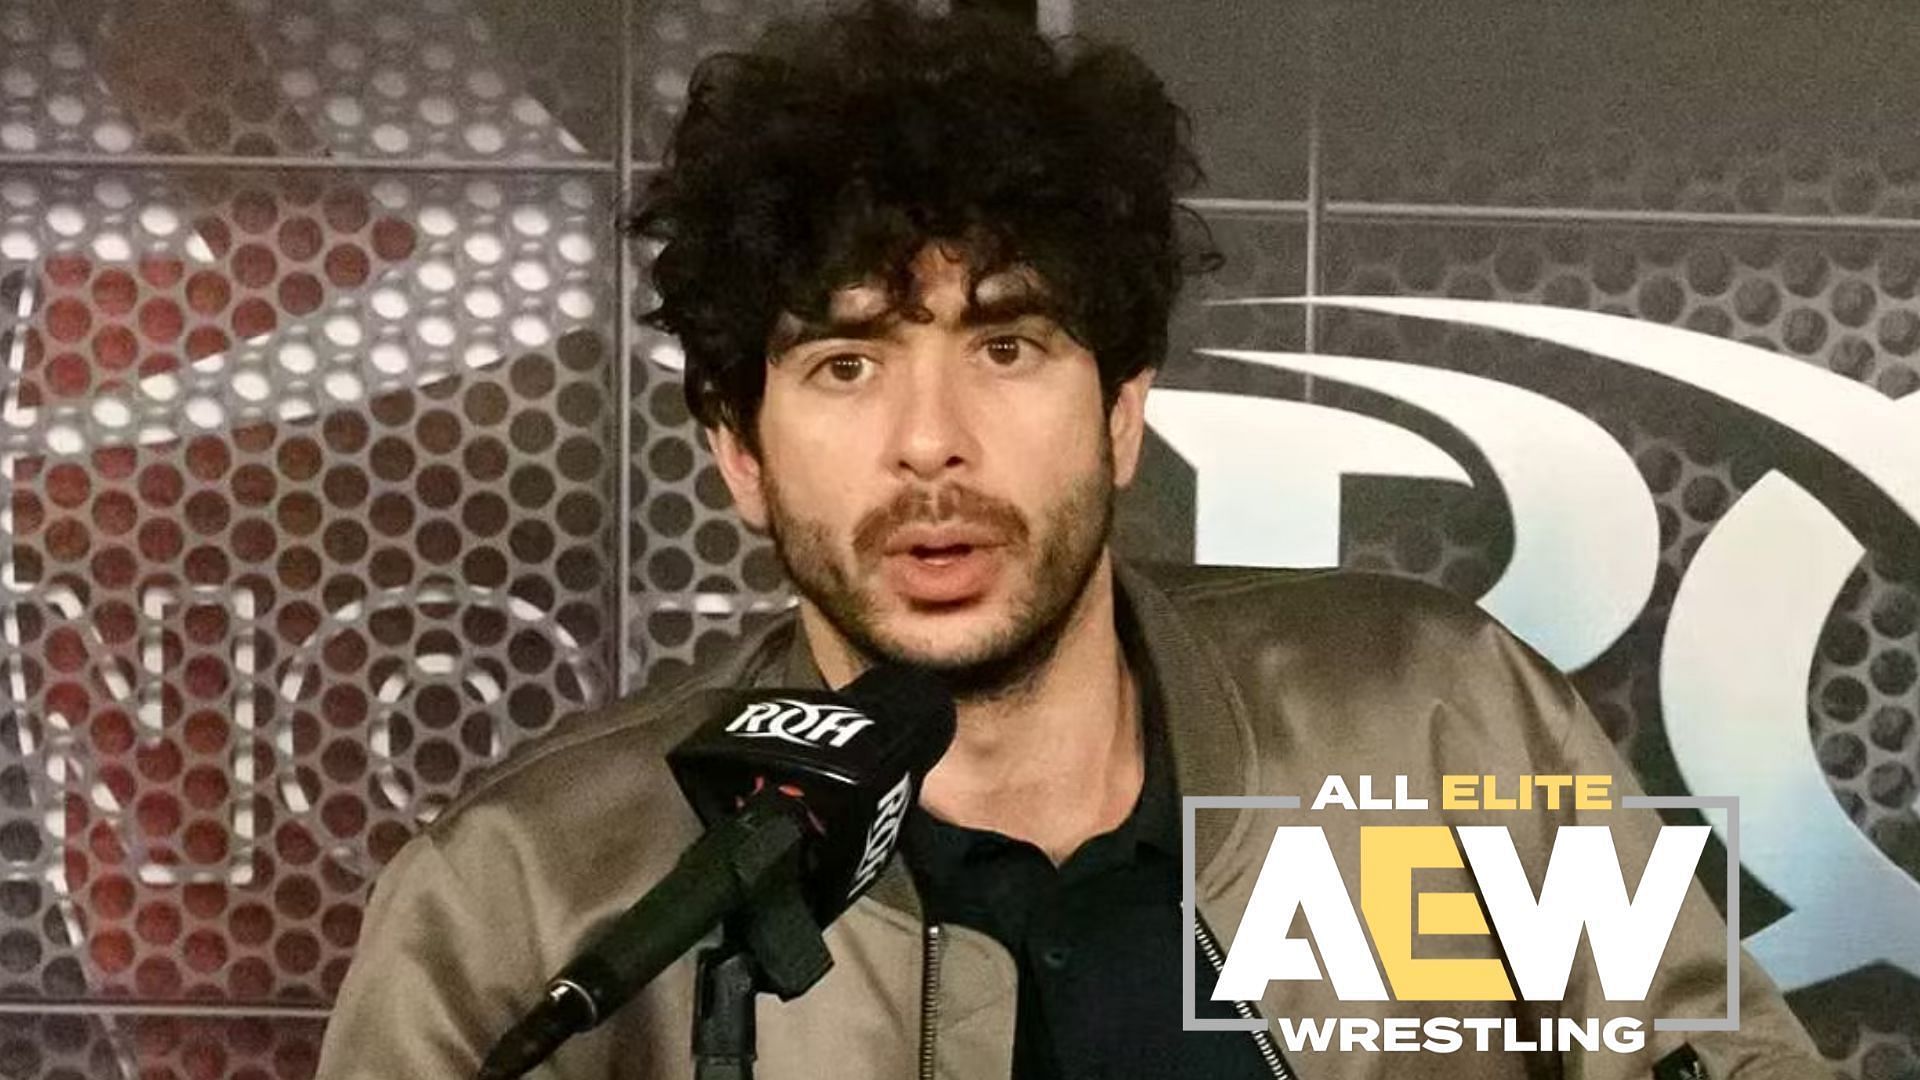 AEW President Tony Khan rejected a cameo appearance proposal